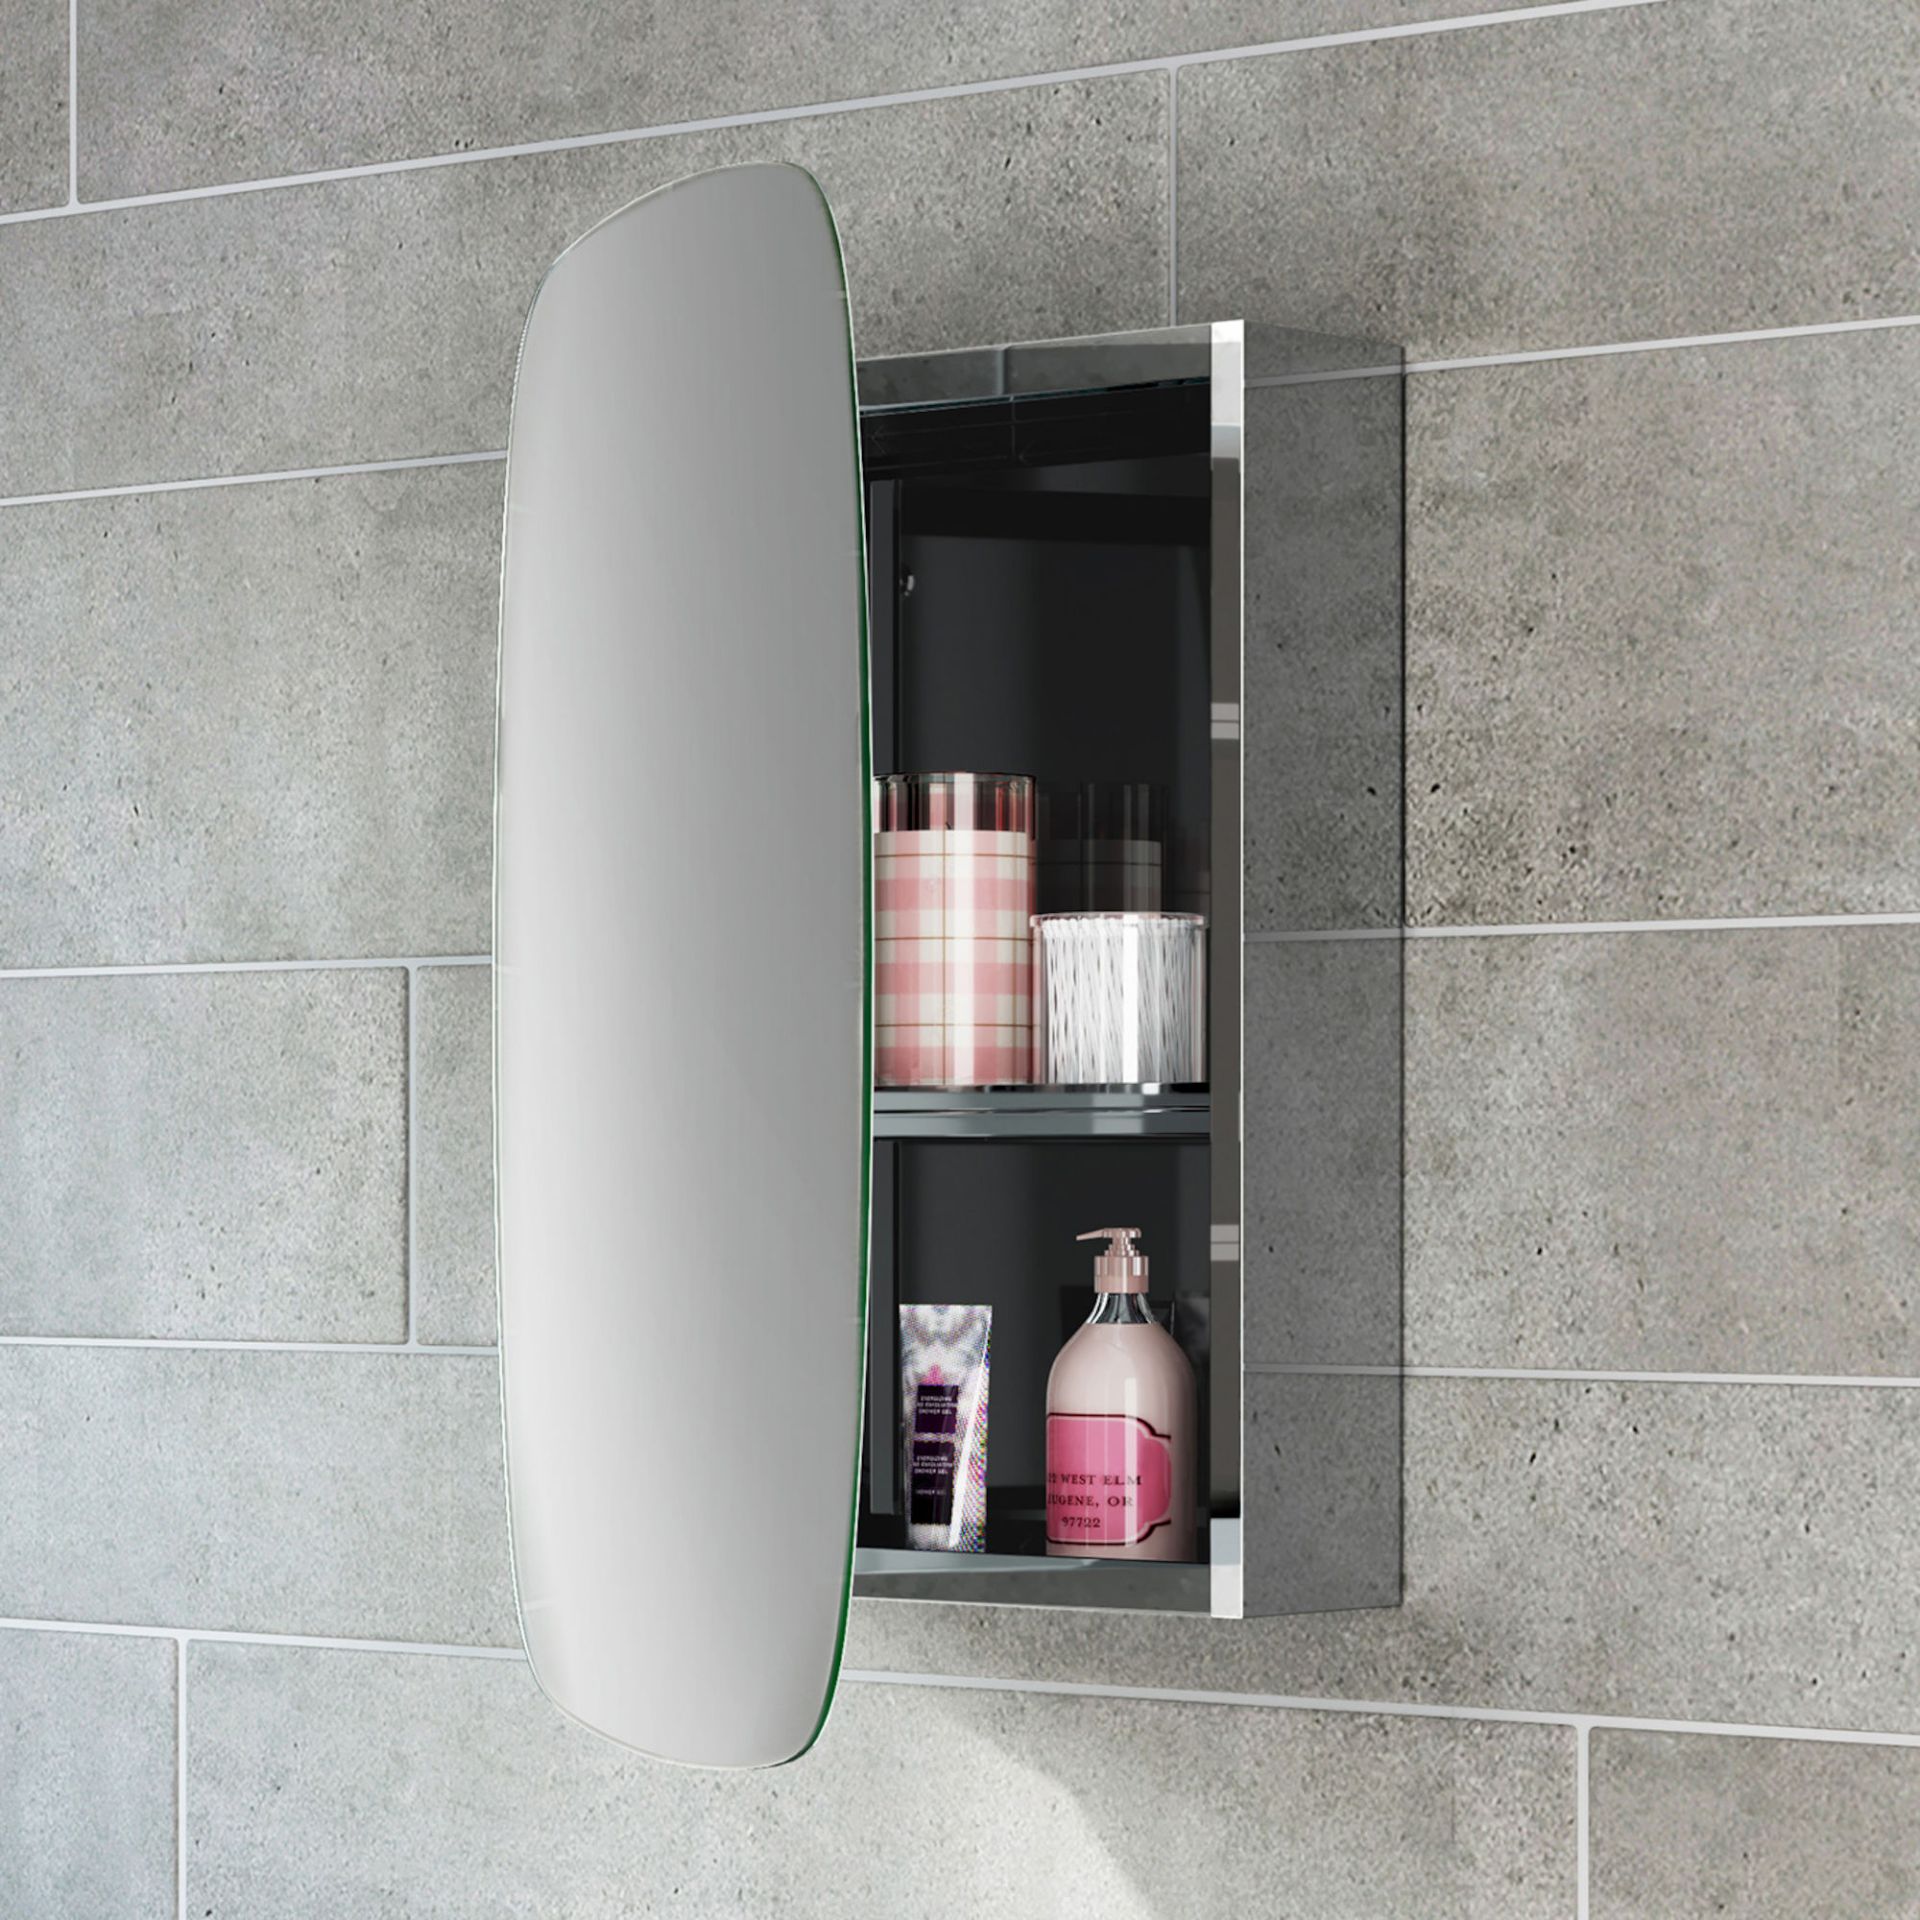 (DK114) 450x600 Curved Rectangular Liberty Stainless Steel Mirror Cabinet. Made from high-grade